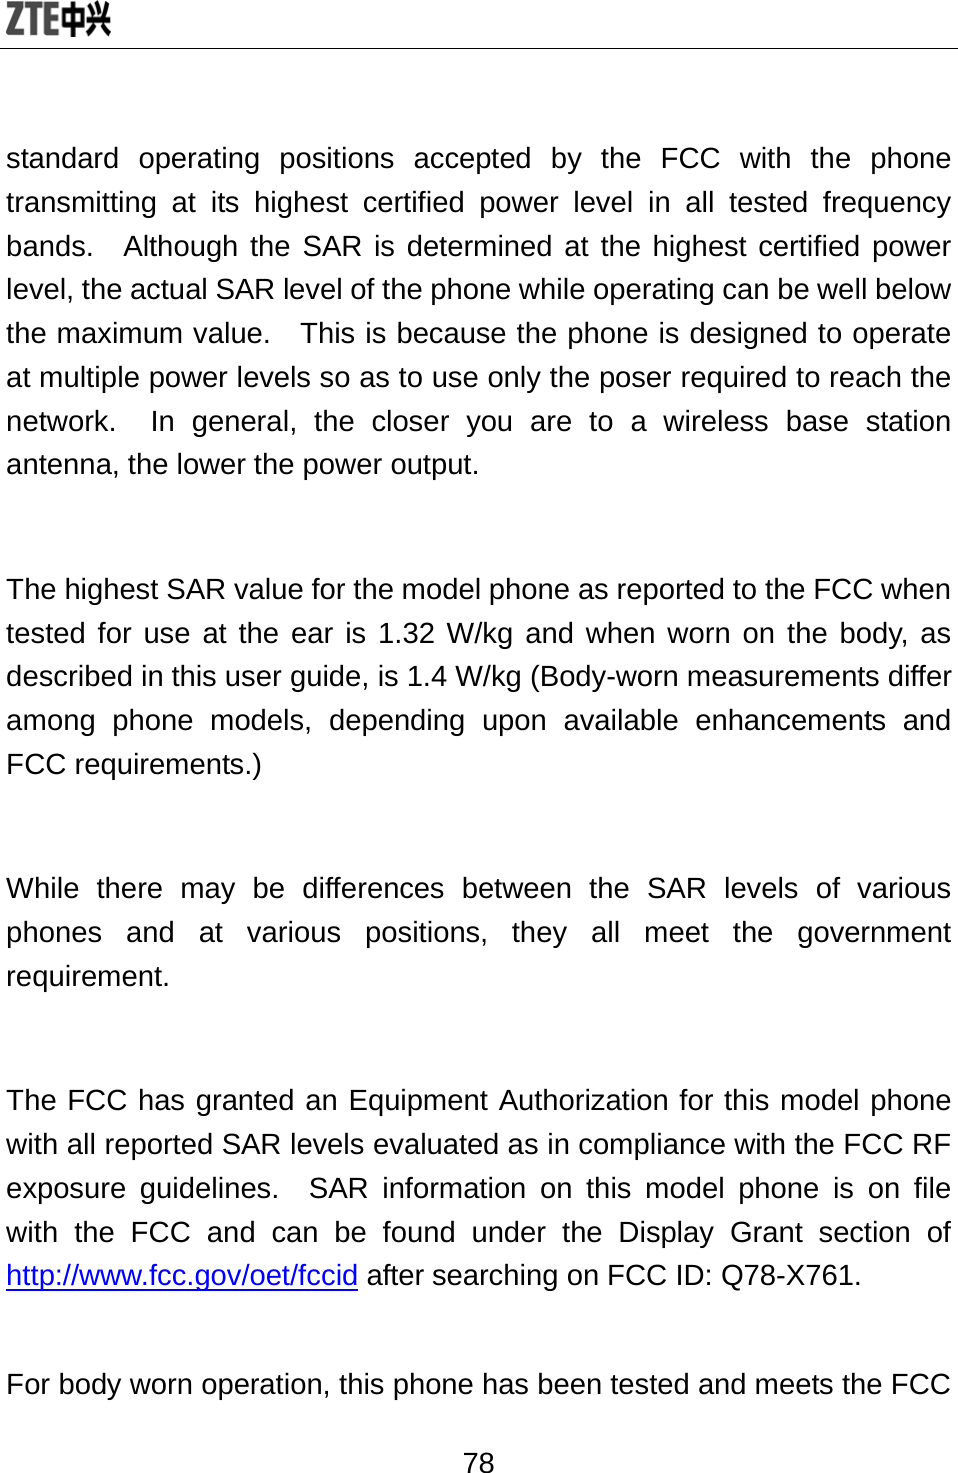  78 standard operating positions accepted by the FCC with the phone transmitting at its highest certified power level in all tested frequency bands.  Although the SAR is determined at the highest certified power level, the actual SAR level of the phone while operating can be well below the maximum value.   This is because the phone is designed to operate at multiple power levels so as to use only the poser required to reach the network.  In general, the closer you are to a wireless base station antenna, the lower the power output.  The highest SAR value for the model phone as reported to the FCC when tested for use at the ear is 1.32 W/kg and when worn on the body, as described in this user guide, is 1.4 W/kg (Body-worn measurements differ among phone models, depending upon available enhancements and FCC requirements.)  While there may be differences between the SAR levels of various phones and at various positions, they all meet the government requirement.  The FCC has granted an Equipment Authorization for this model phone with all reported SAR levels evaluated as in compliance with the FCC RF exposure guidelines.  SAR information on this model phone is on file with the FCC and can be found under the Display Grant section of http://www.fcc.gov/oet/fccid after searching on FCC ID: Q78-X761.  For body worn operation, this phone has been tested and meets the FCC 